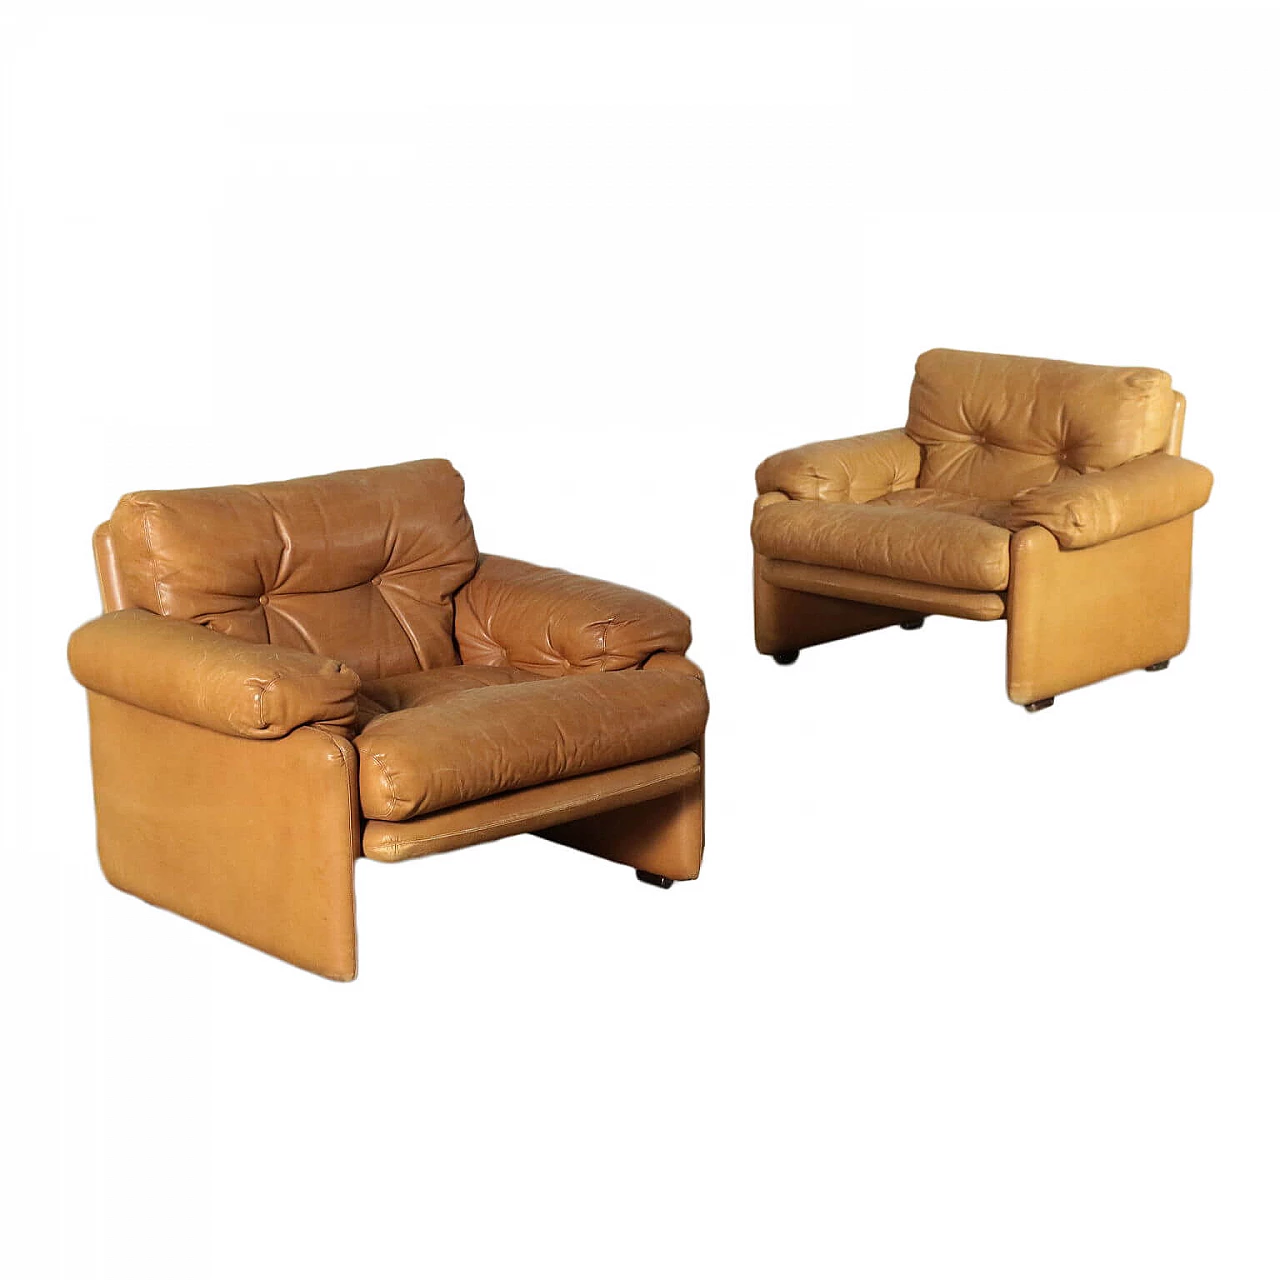 Pair of Coronado leather armchairs by Tobia Scarpa for C&B, 1970s 1198114